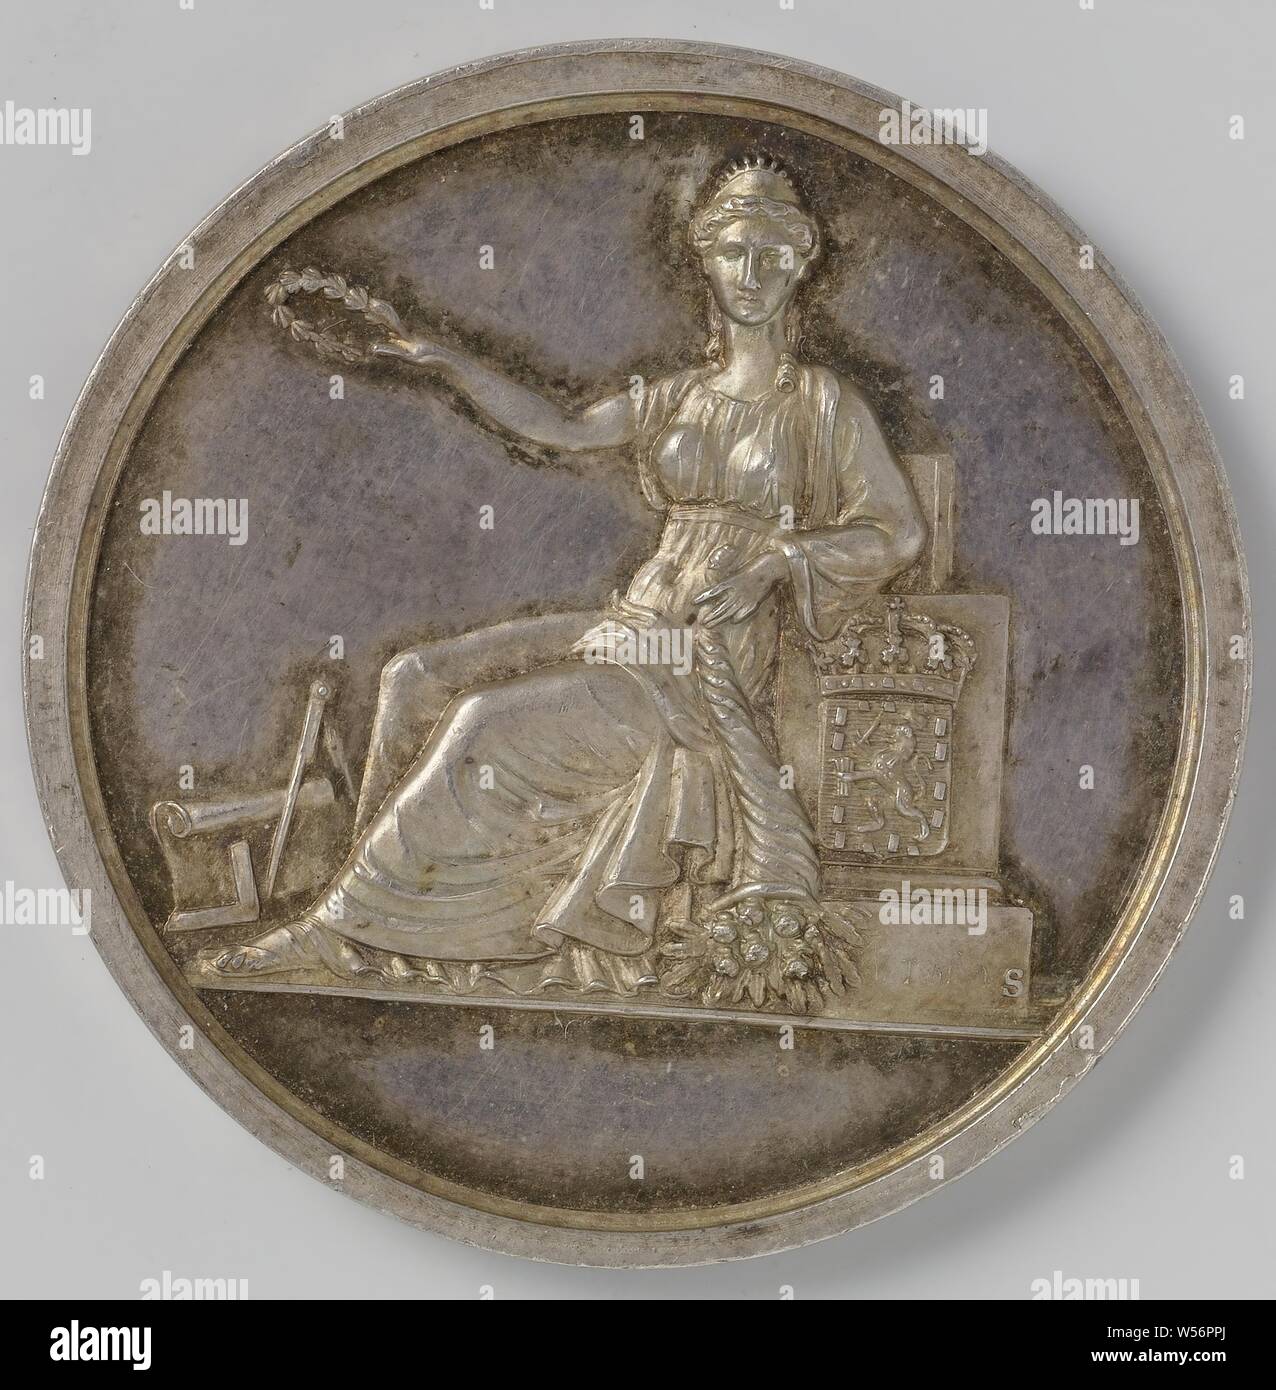 Prize medal awarded to the painter Johannes Bosboom in 1833 by the 1st department of the 's-Gravenhaagsche Teeken Akademie, Silver Medal. Front: seated Minerva, with its head turned towards the viewer, protruding laurel wreath. Leaning against a pedestal on which the national coat of arms on which signature. At her feet a compass, a square and a roll of paper. Reverse: inscription., The Hague, Johannes Bosboom, 's-Gravenhaagsche Teeken Academy, Jean Henri Simon, Netherlands, 1817, silver (metal), engraving, d 3.8 cm Stock Photo